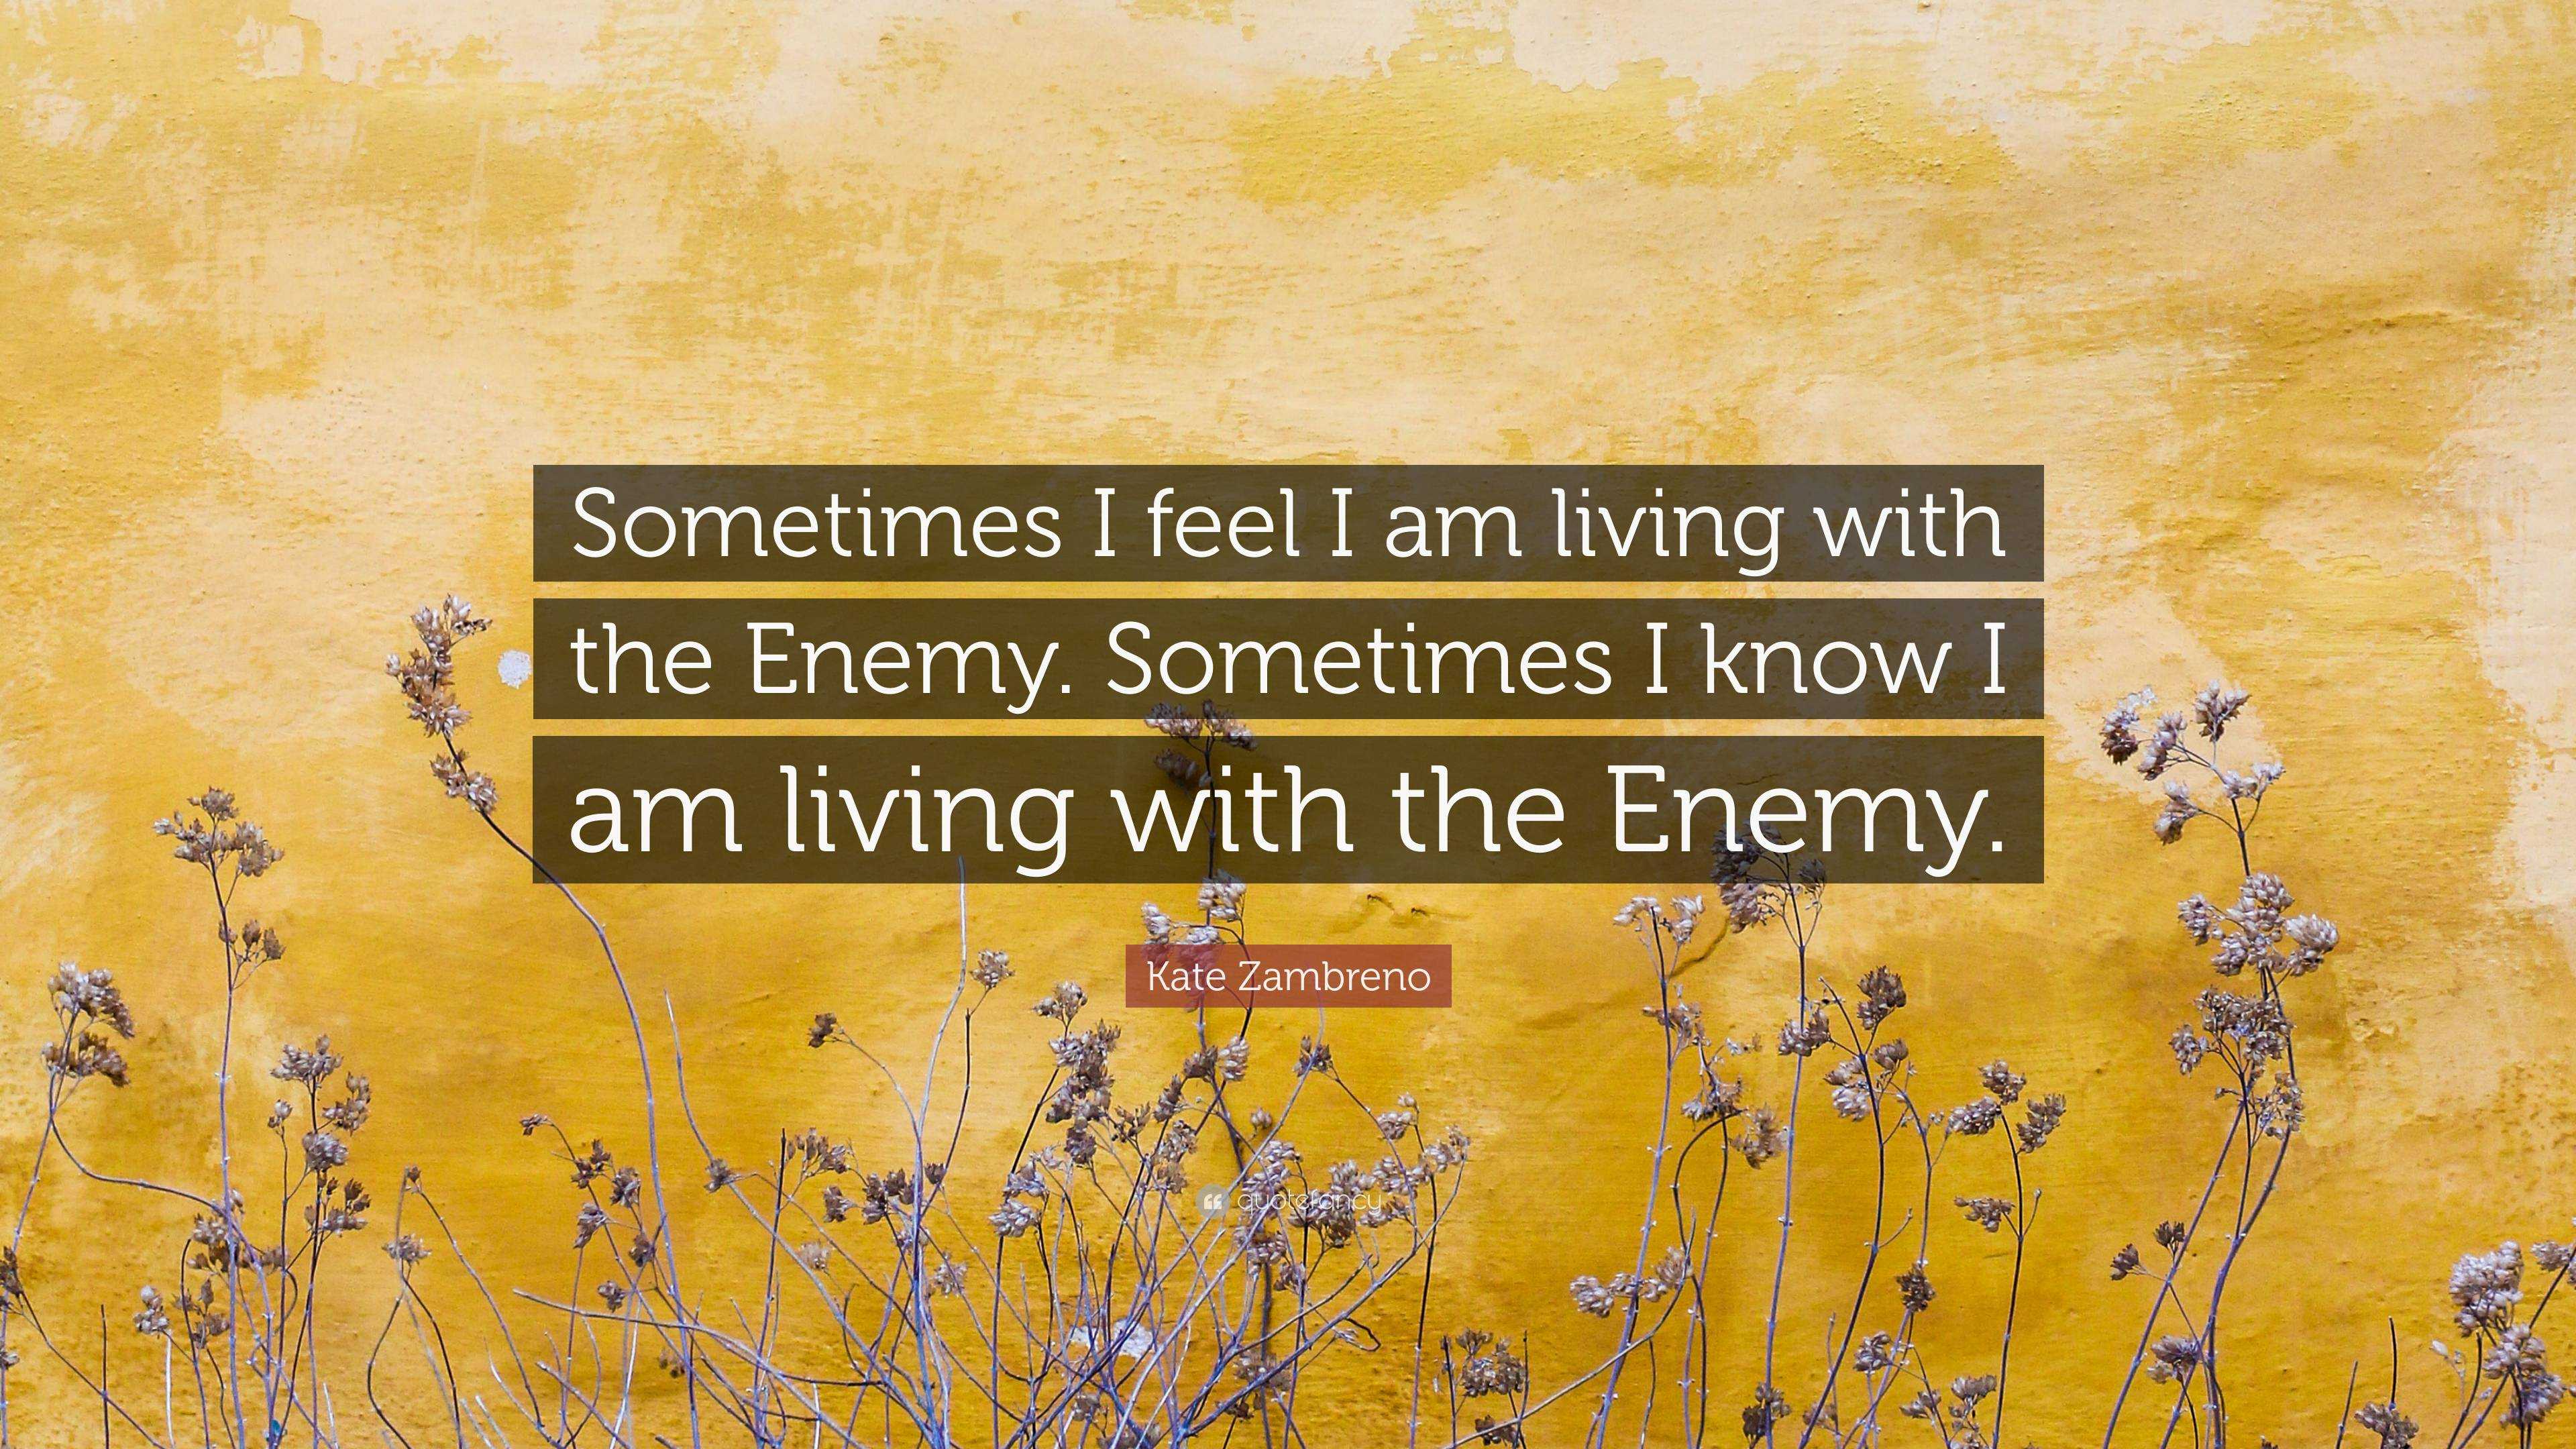 https://quotefancy.com/media/wallpaper/3840x2160/6619438-Kate-Zambreno-Quote-Sometimes-I-feel-I-am-living-with-the-Enemy.jpg